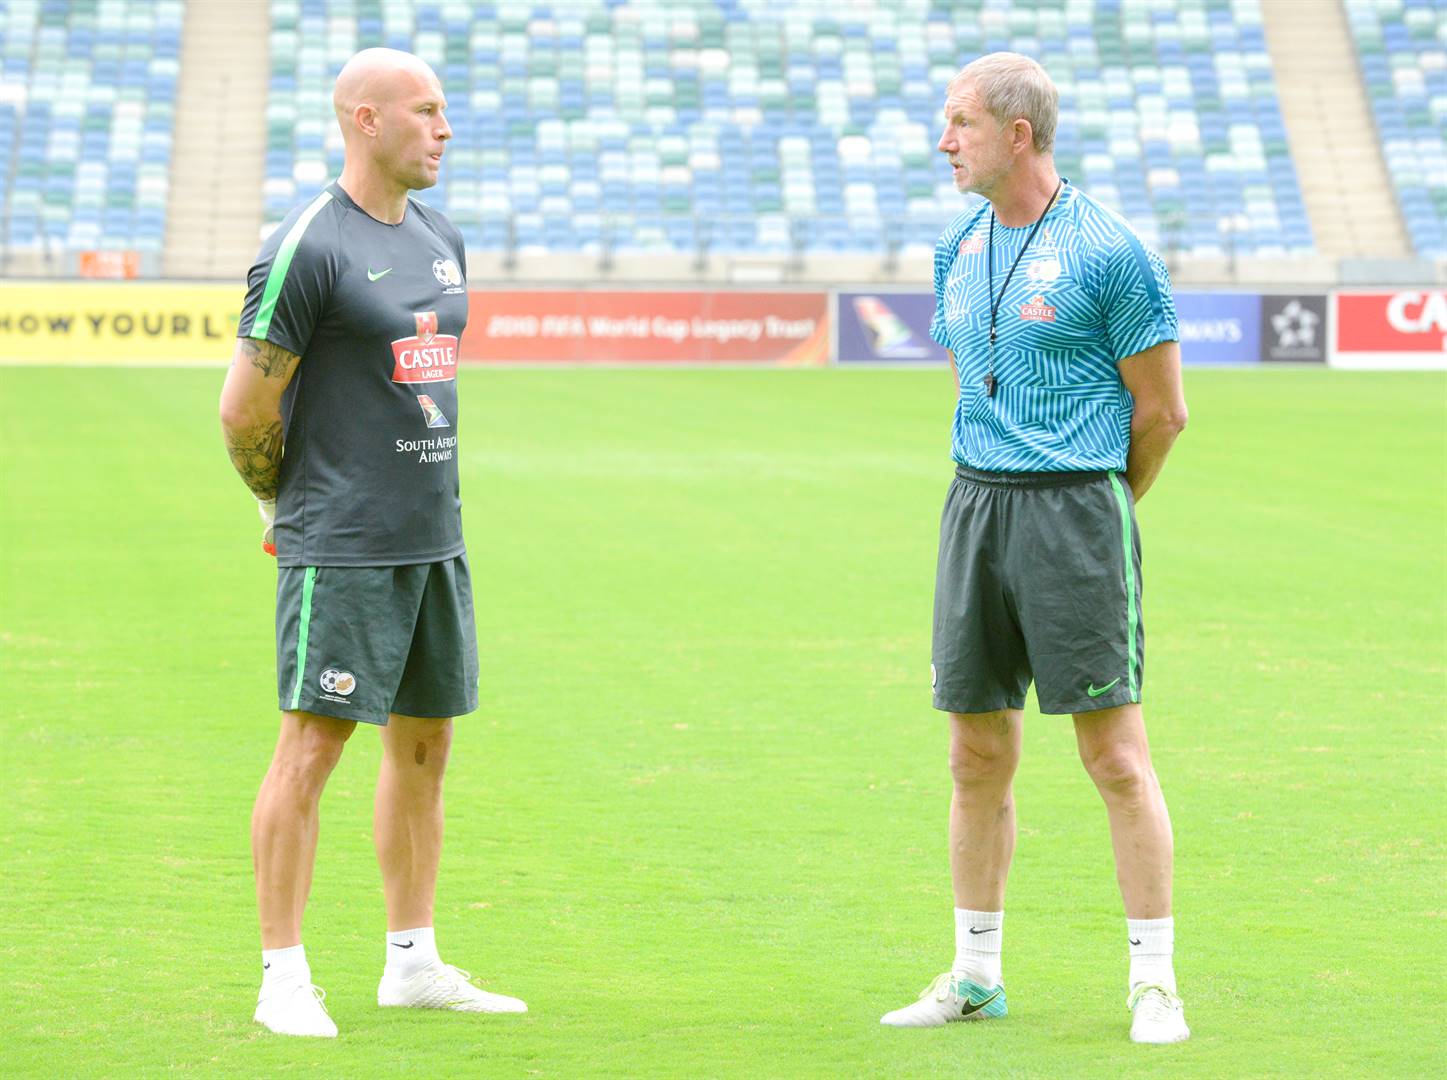 Lee Baxter has a chat to his father Stuart Baxter, who was at the time head coach of Bafana, during the South Africa training session at Moses Mabhida Stadium in September 2018. Picture: Gerhard Duraan/BackpagePix